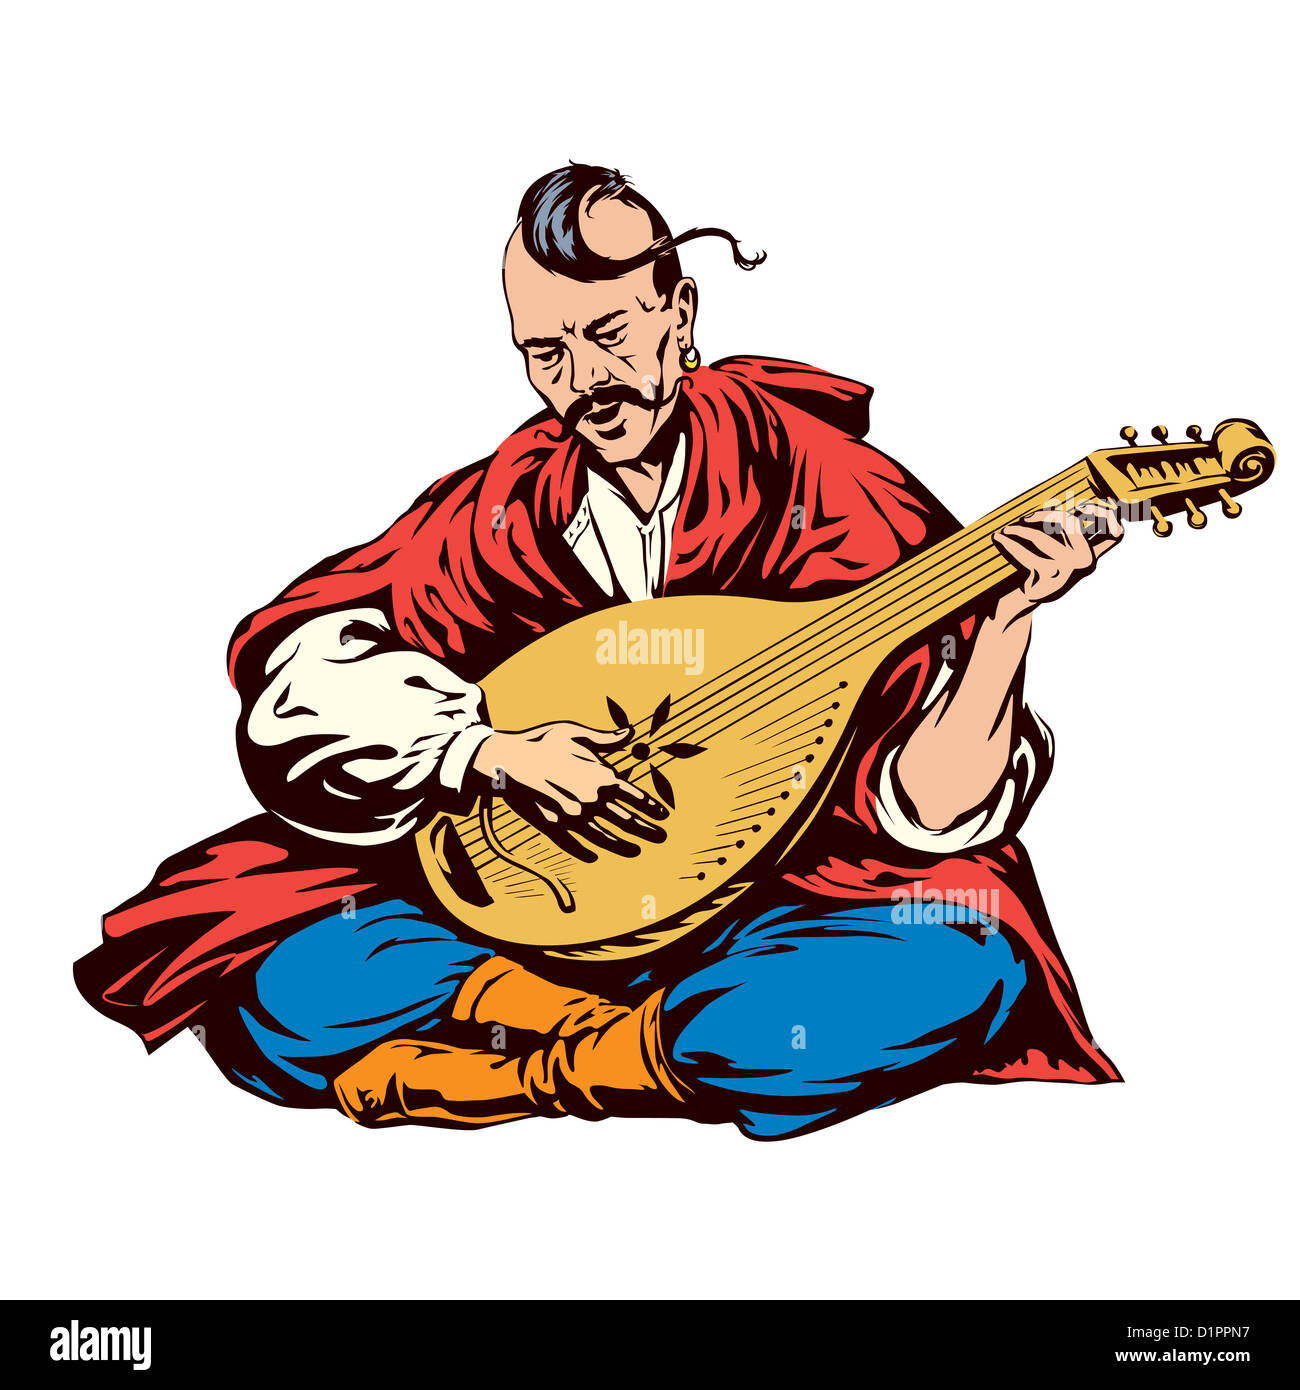 Cossack playing a musical instrument kobza Stock Photo